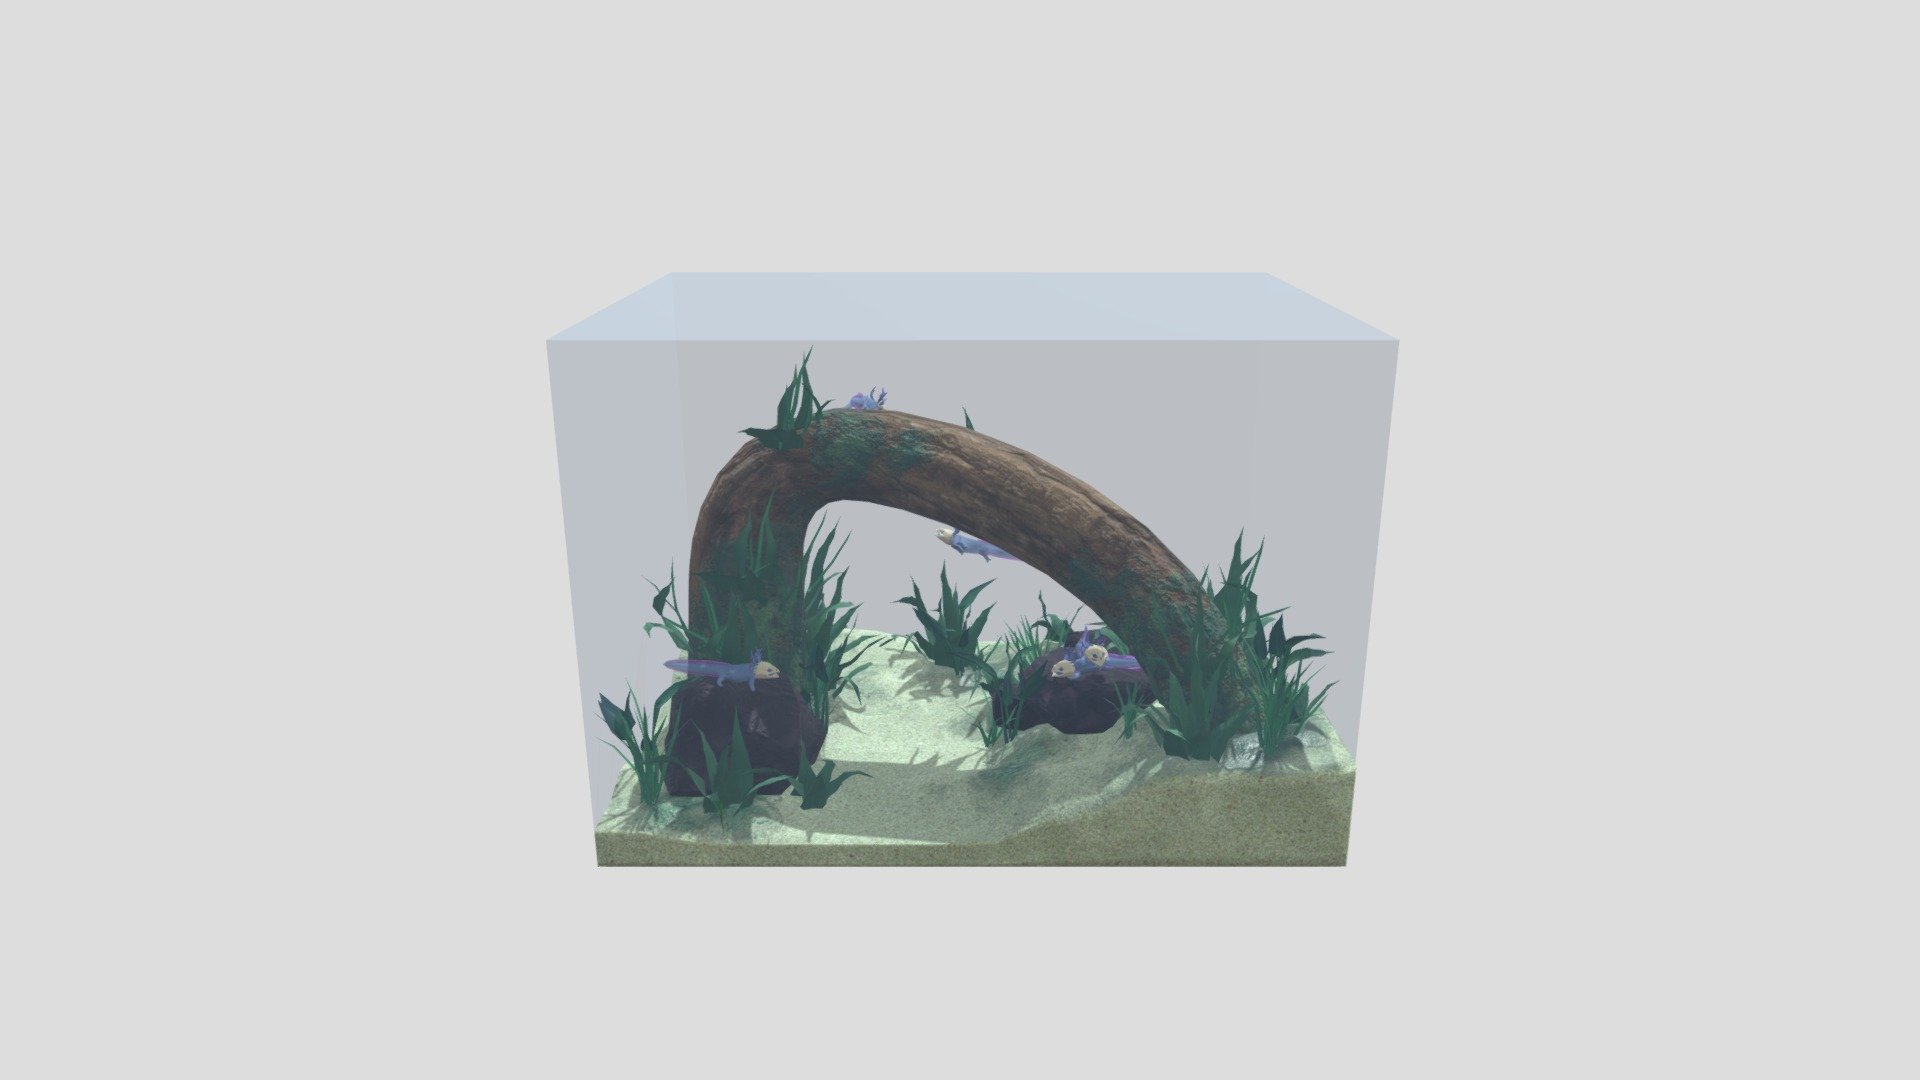 The final 3D composition of the Skelotl creature and the fish tank environment assets I made for my 3D exam 3d model